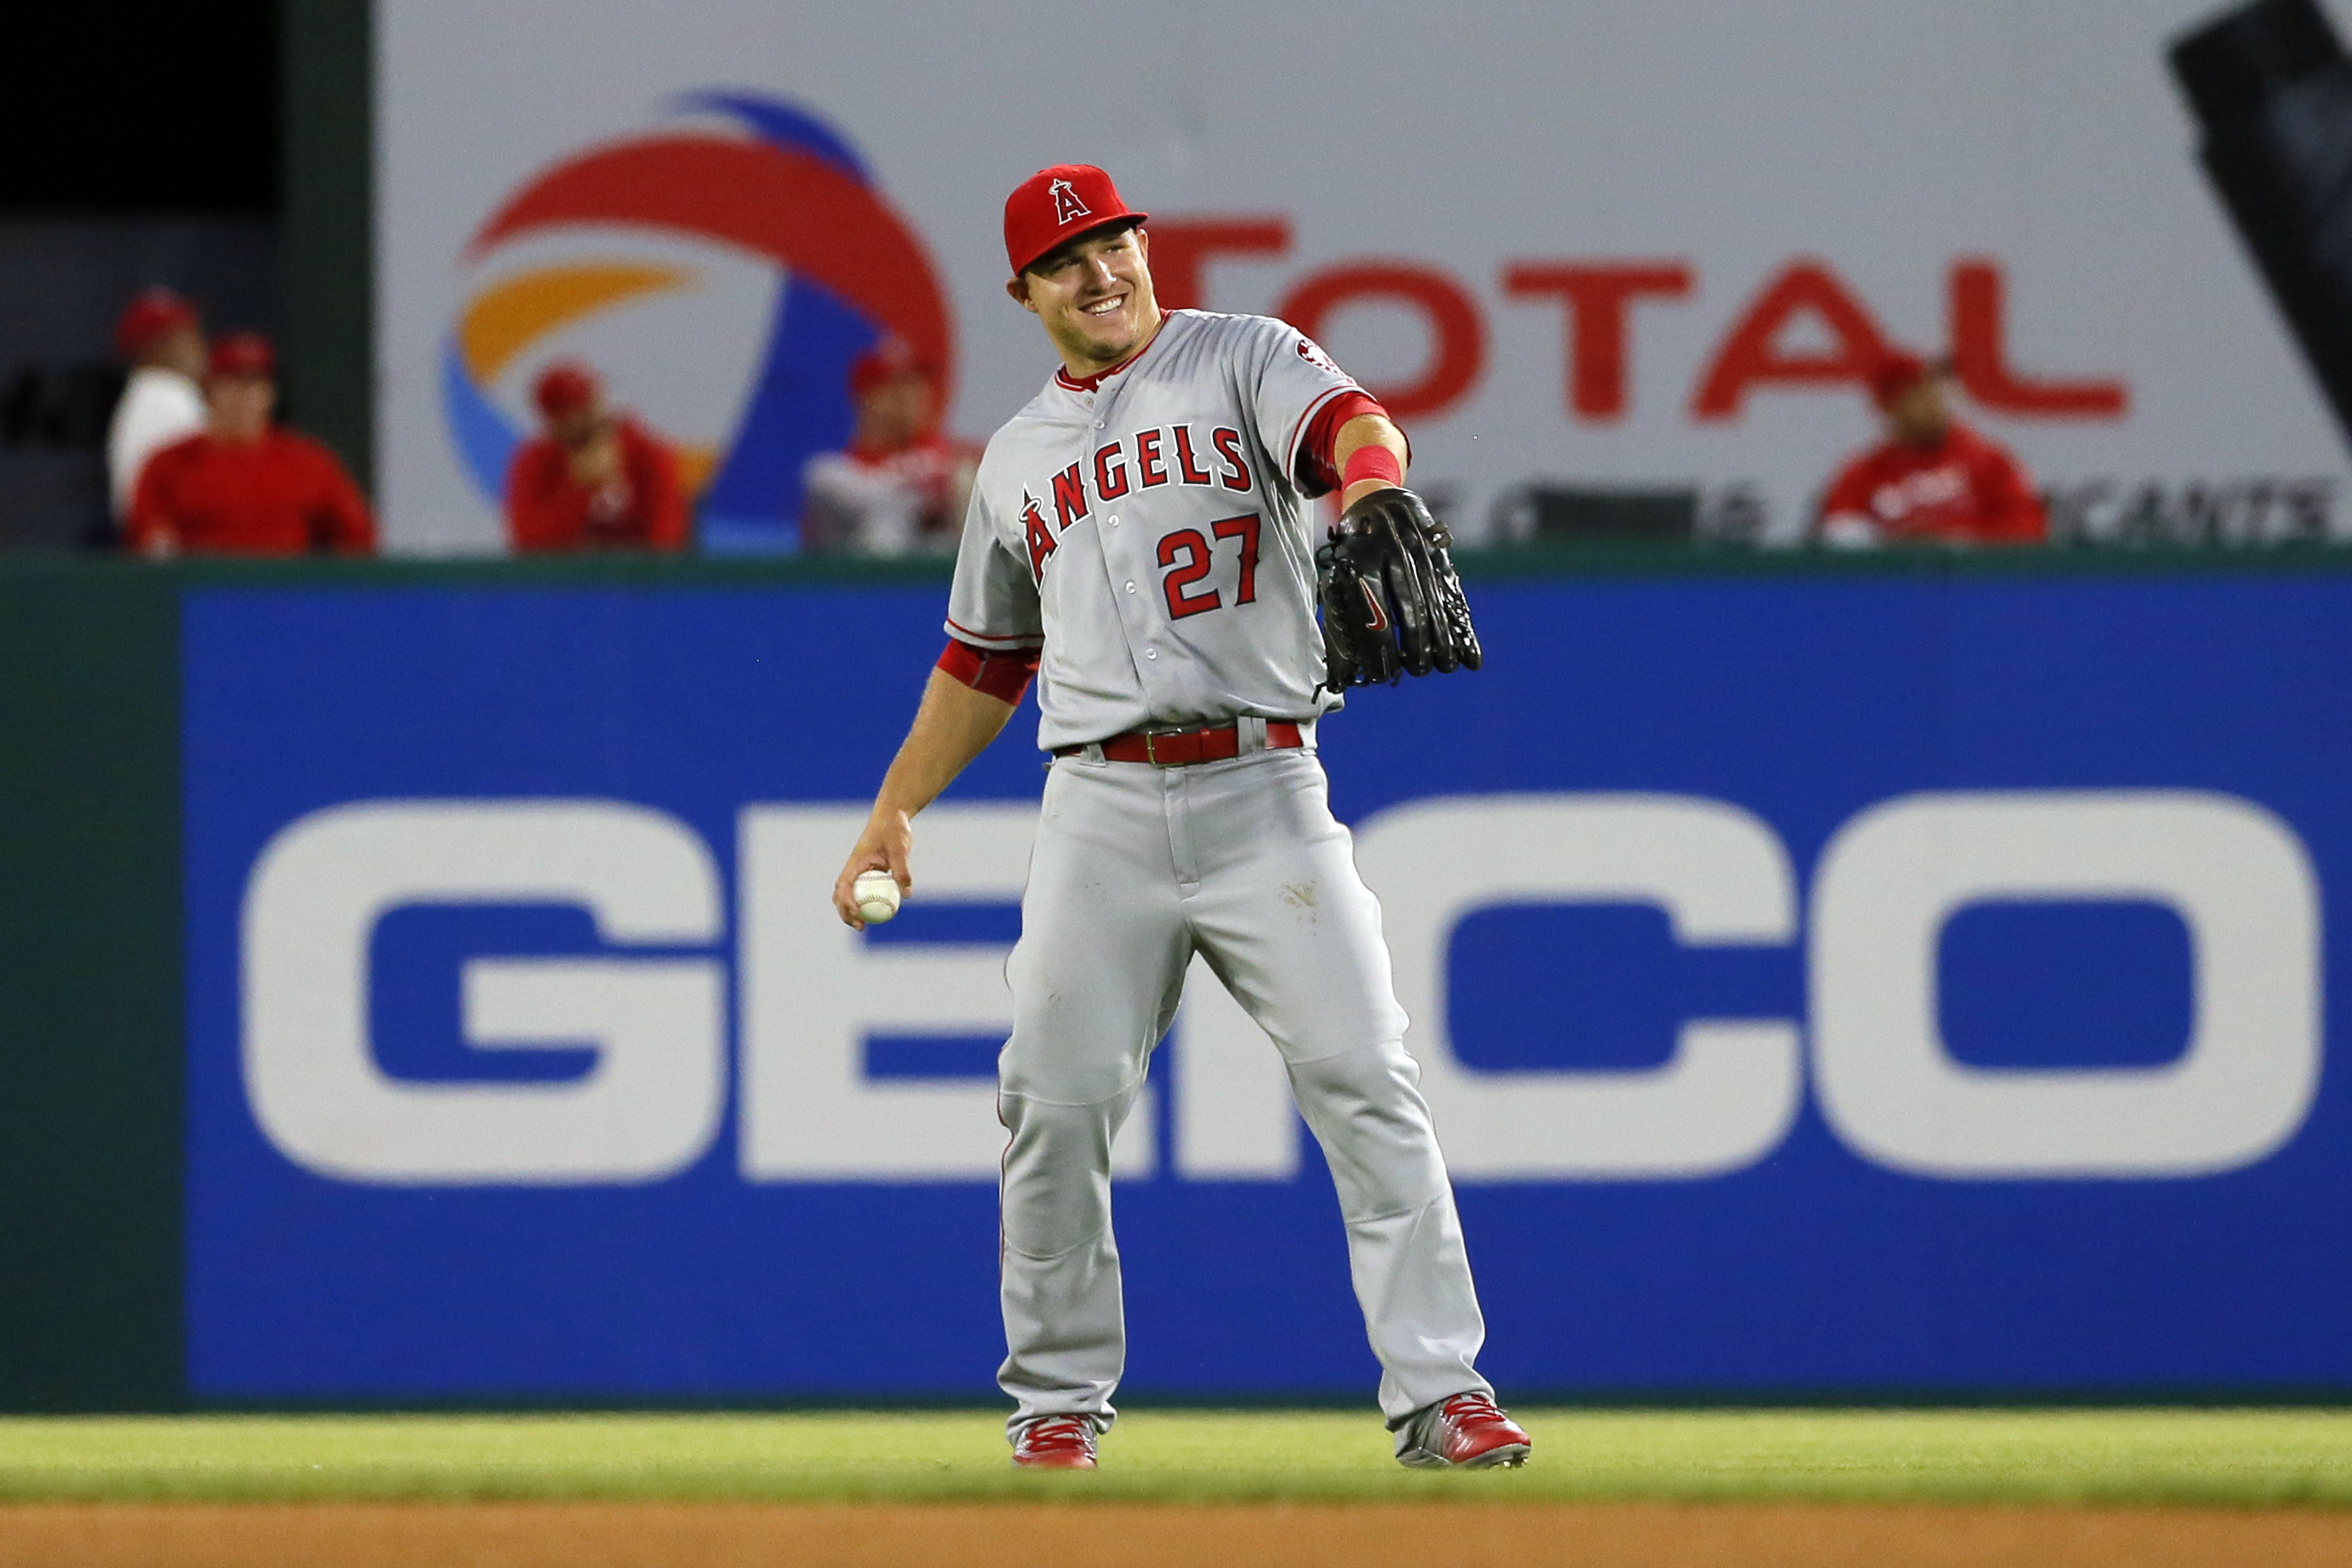 All-Star Notes: Mike Trout wouldn't trade himself if he were the Angels GM  – Orange County Register